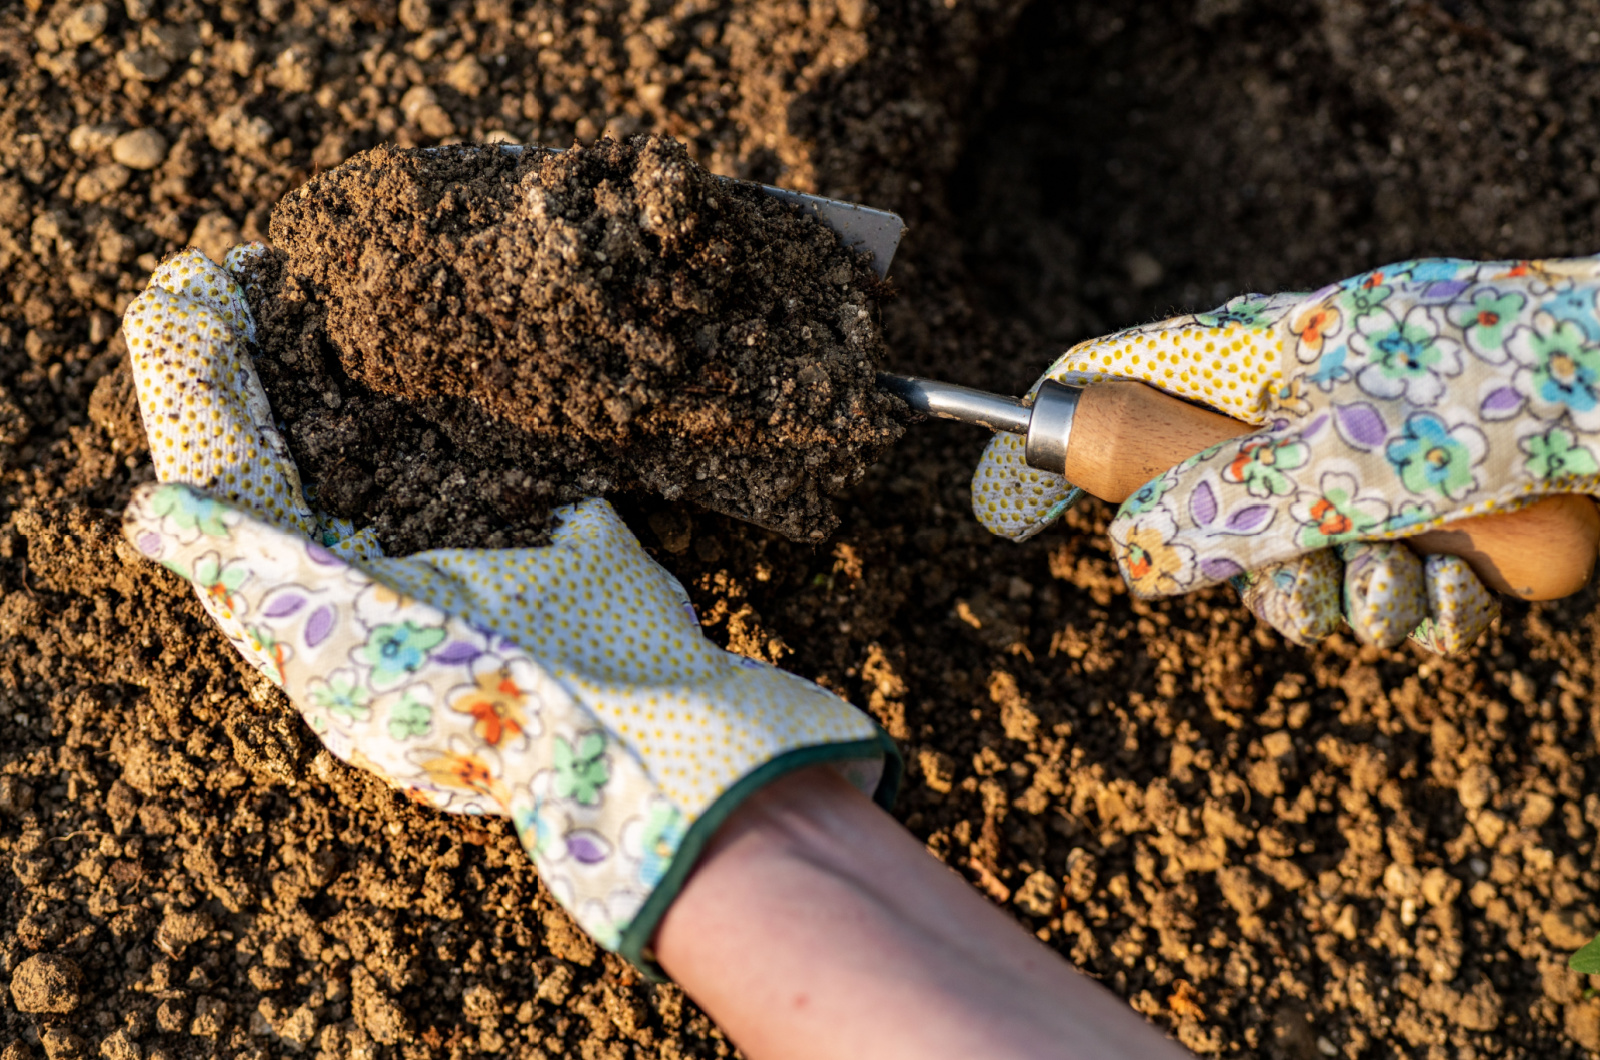 hands with gloves digging soil